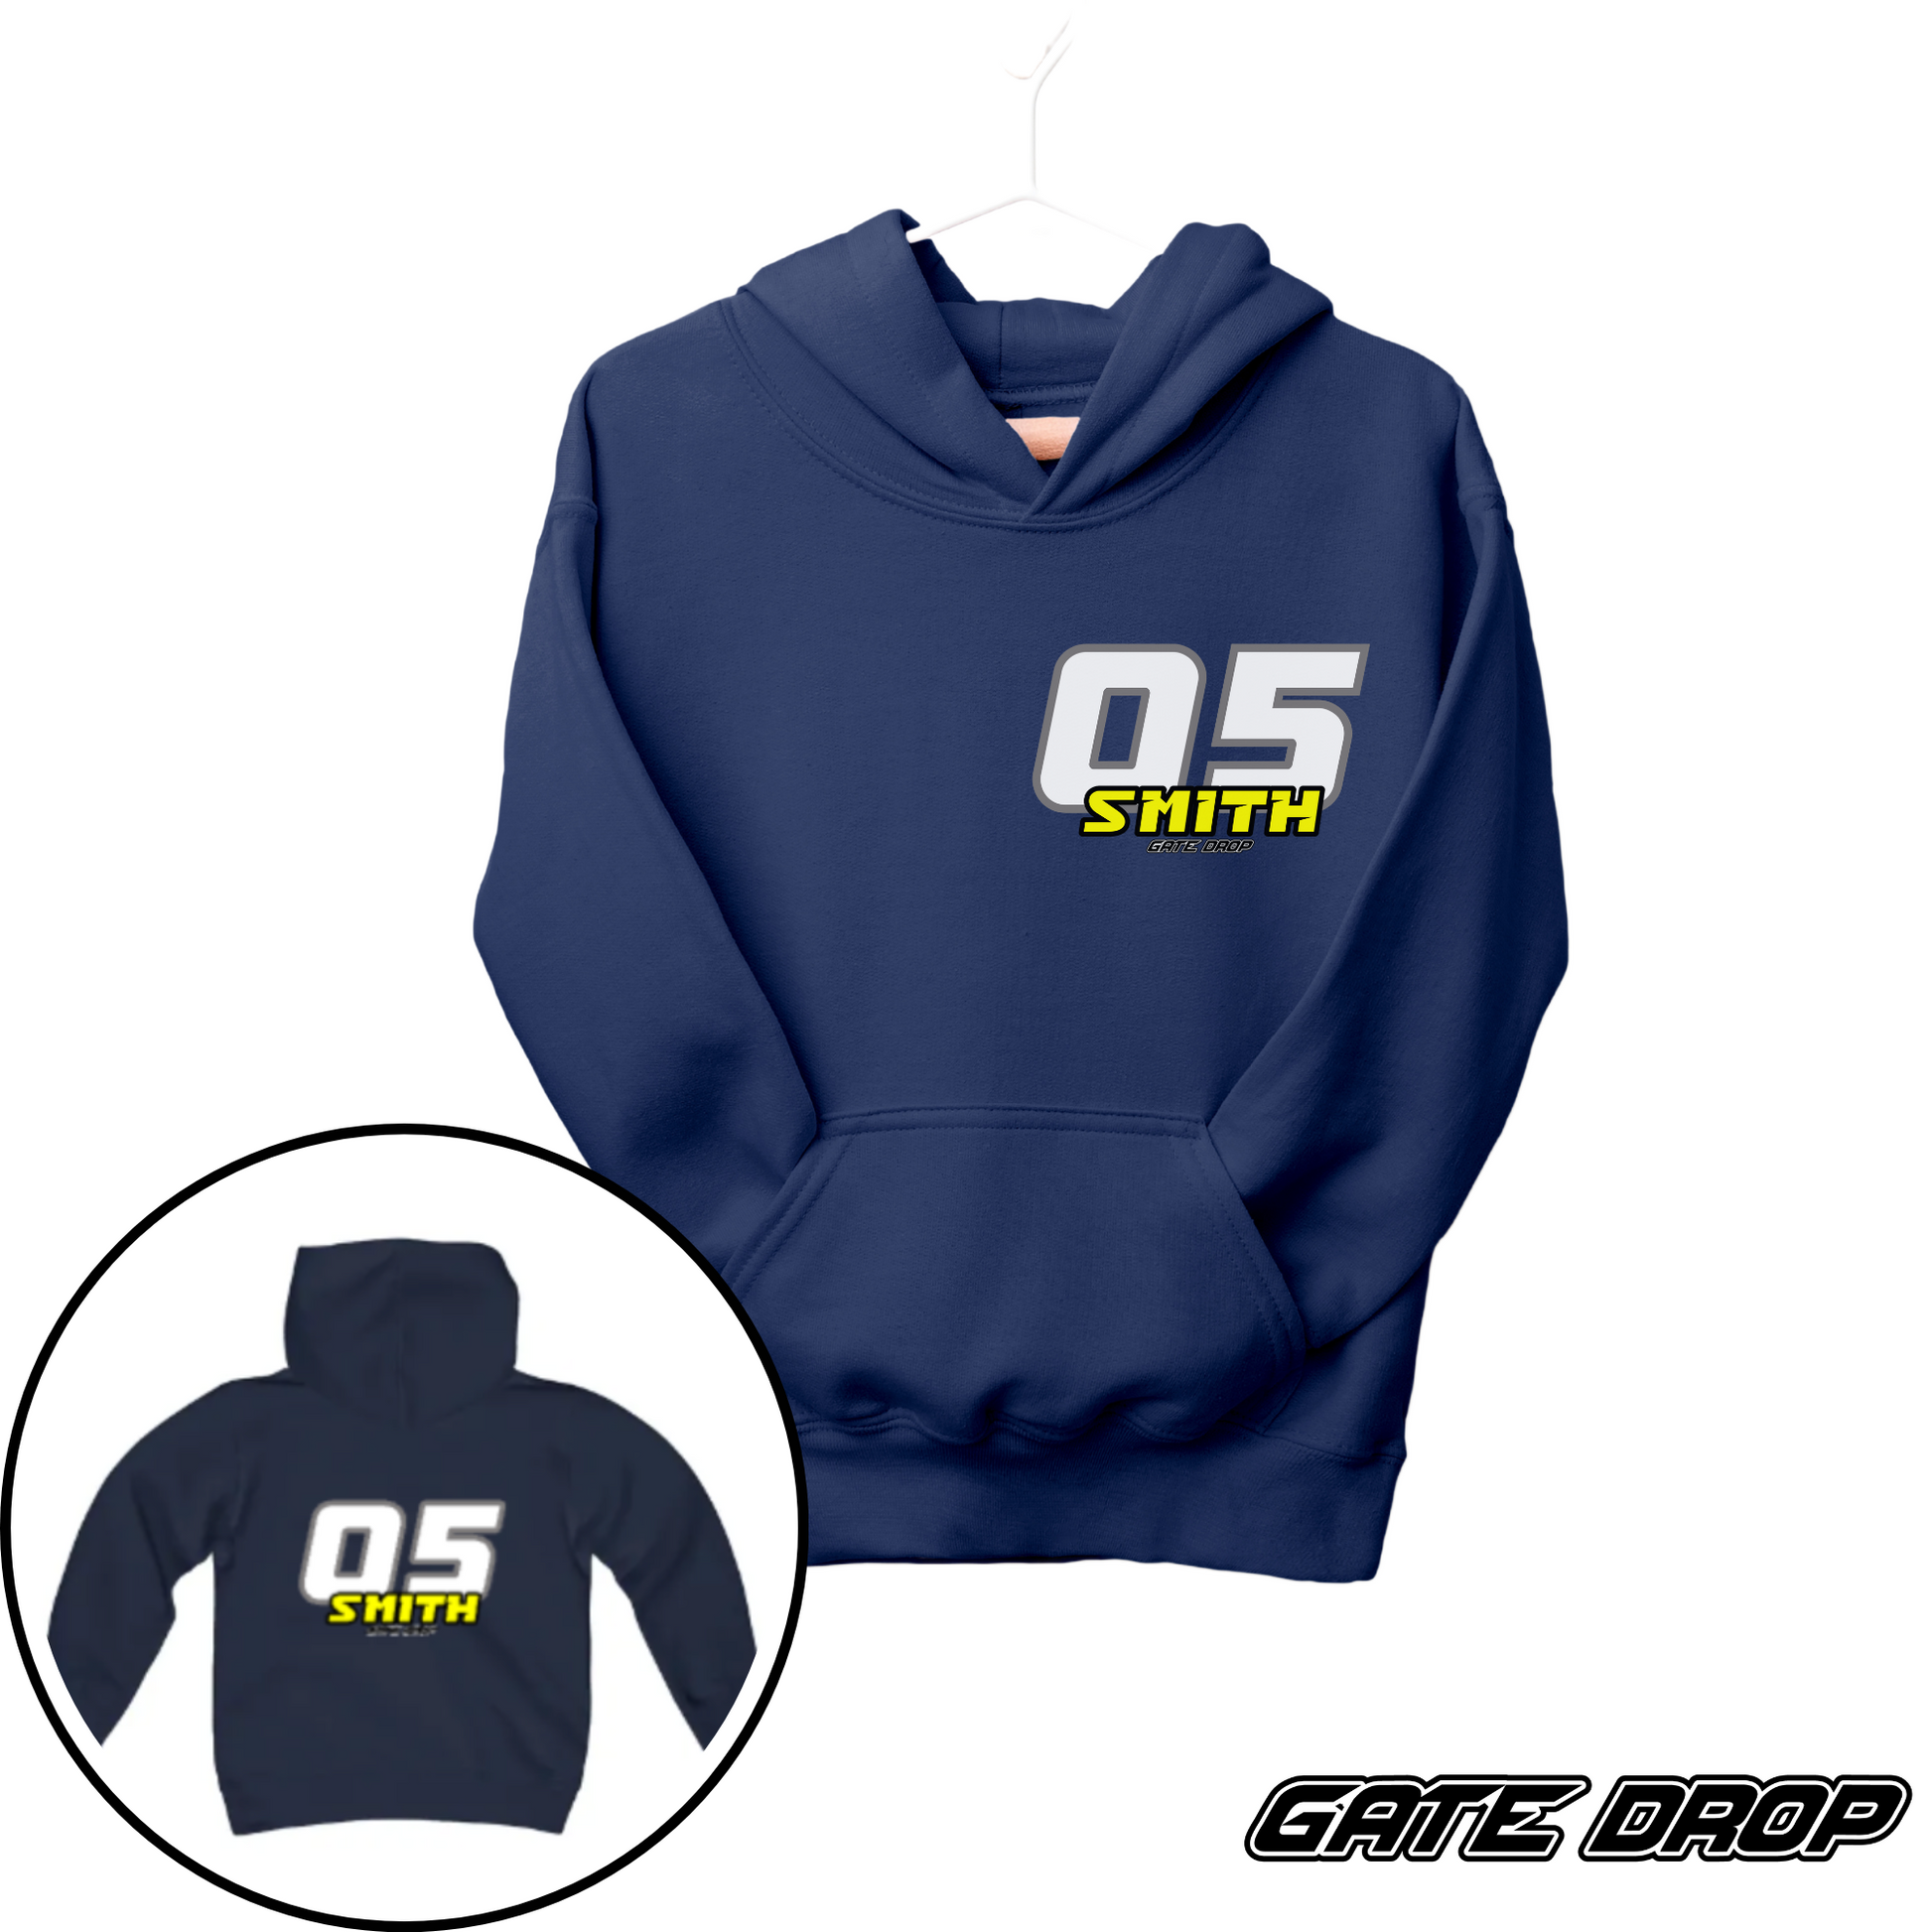 Gate Drop Personalized Race Name and Number Moto Kid Youth Hoodie